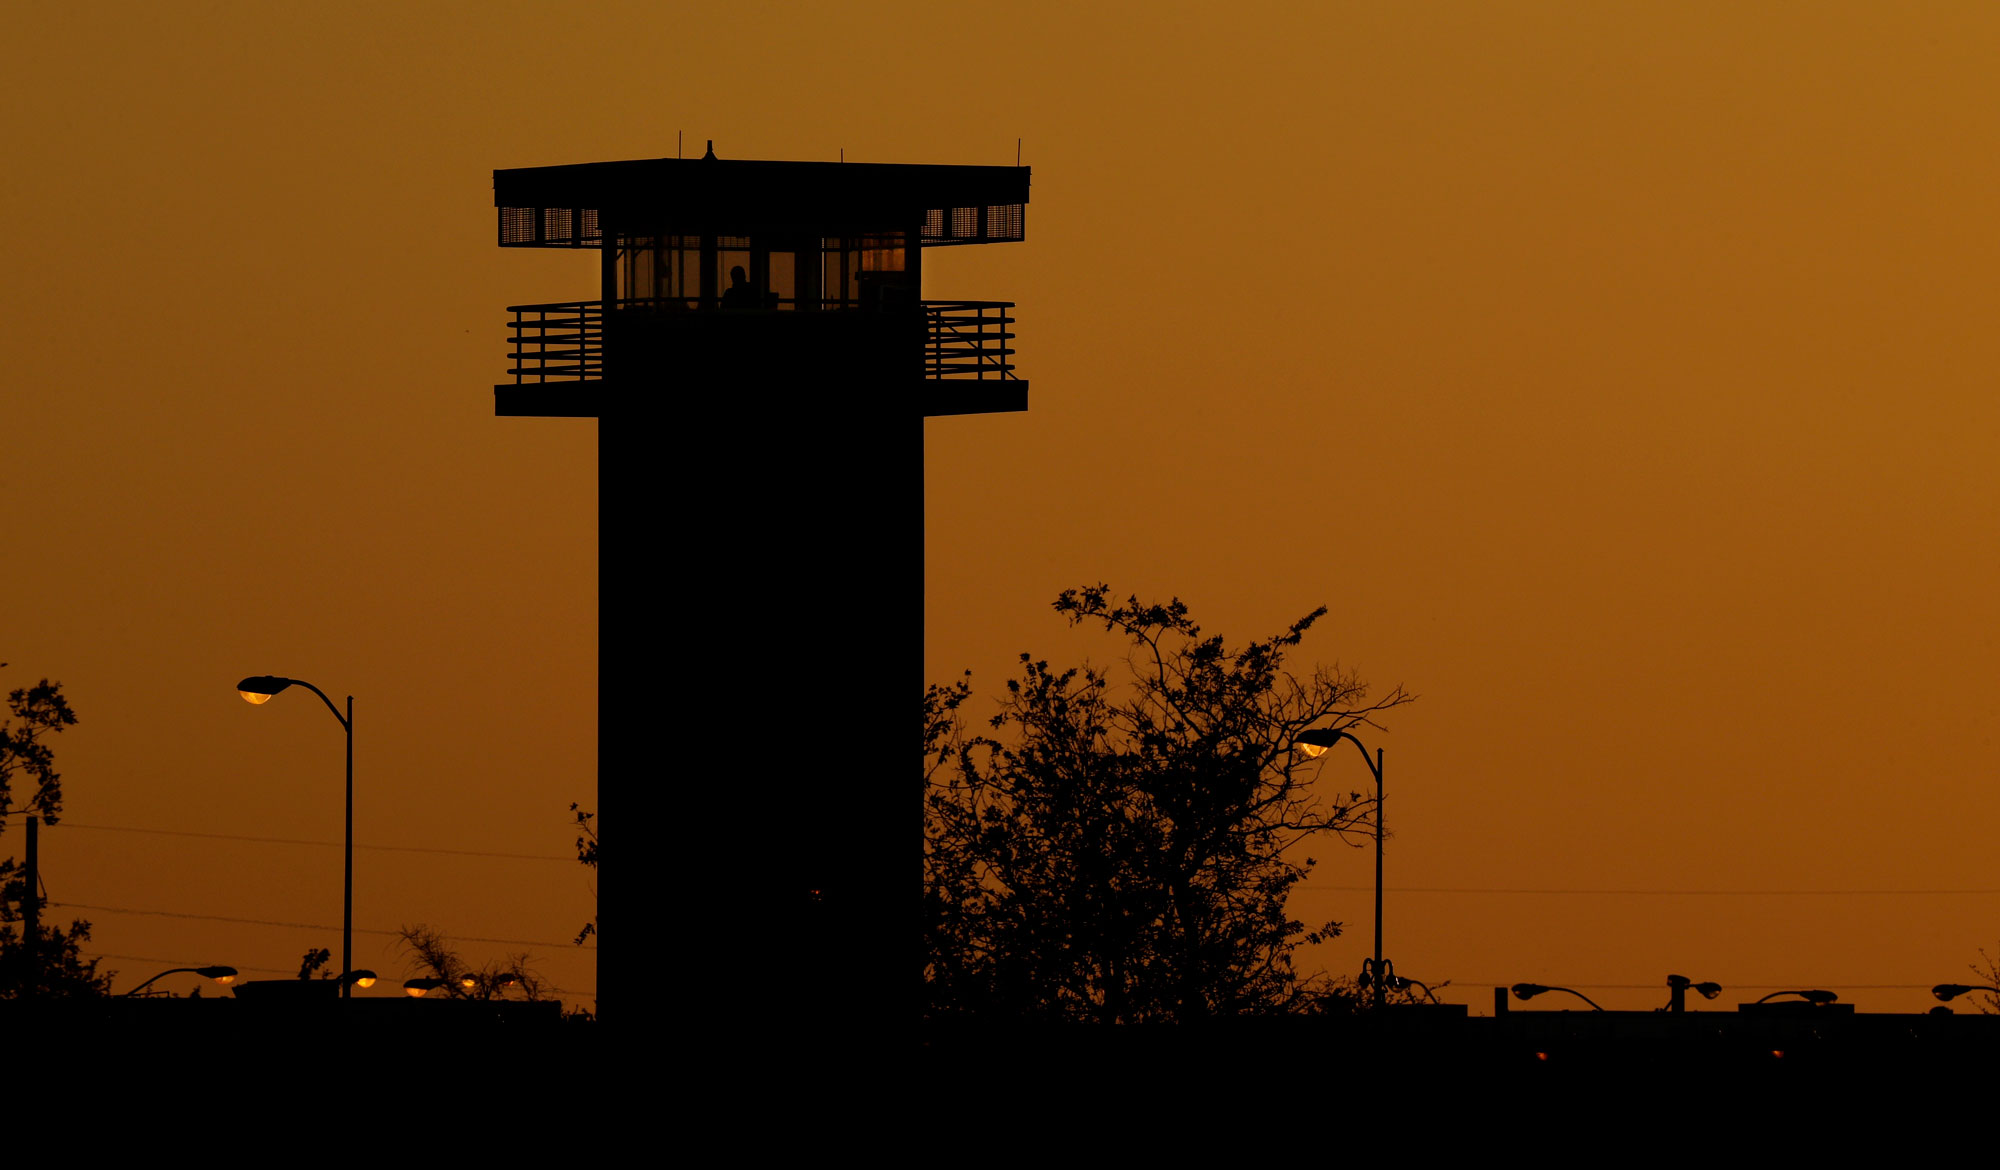 Part of the Texas Department of Criminal Justice's William G. McConnell Unit in Beeville, Texas, stands at sunset on April 15.